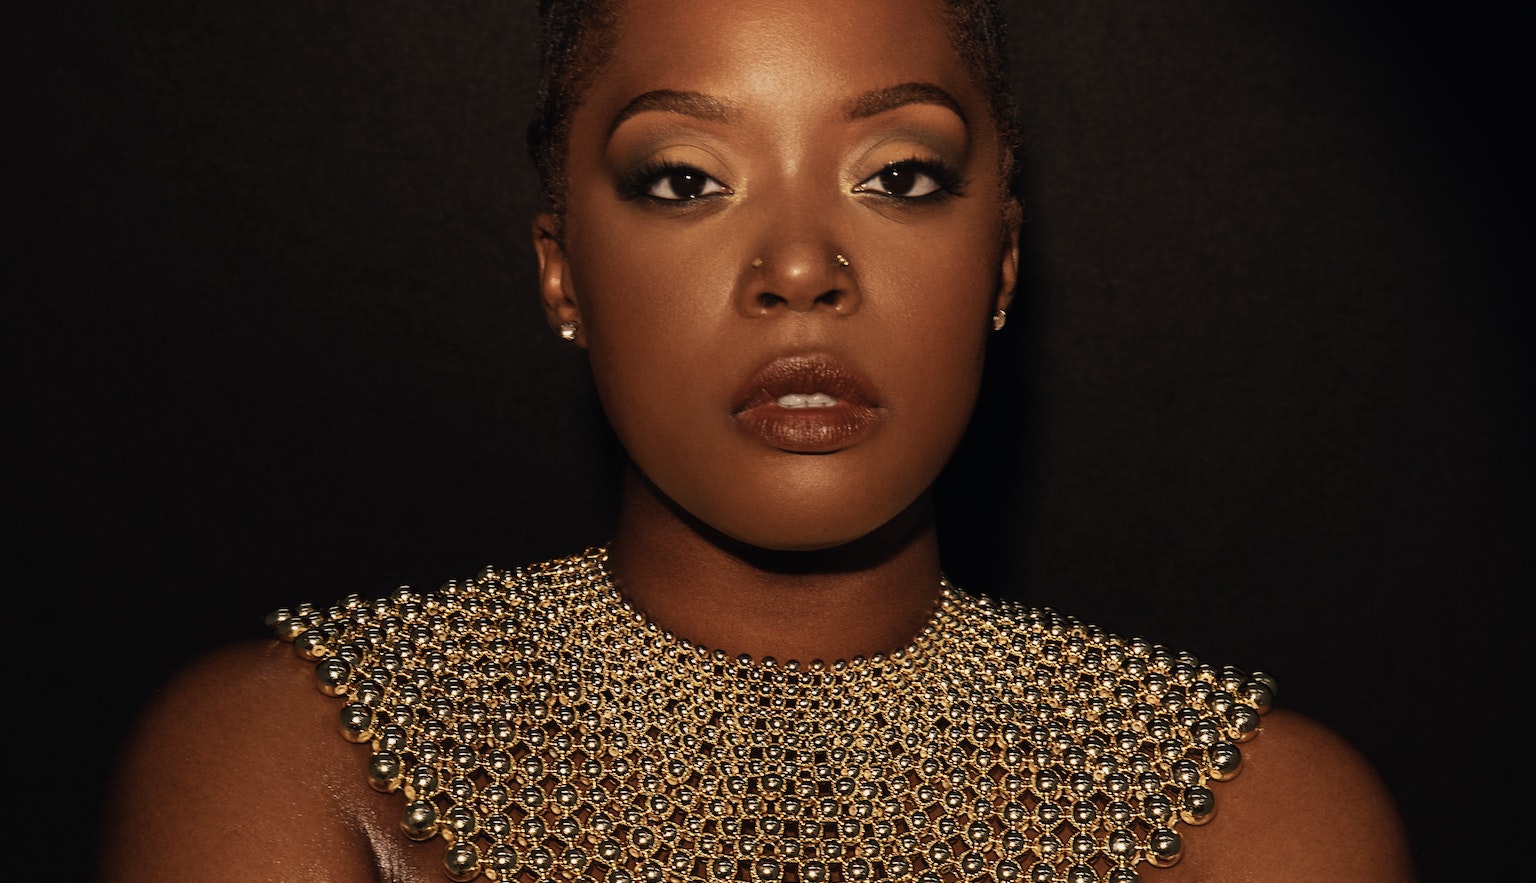 Karen Nyame KG dressed in black with a loose gold choker necklace made from beads, and a bracelet. Both hands are holding her arms as she stares into the camera.